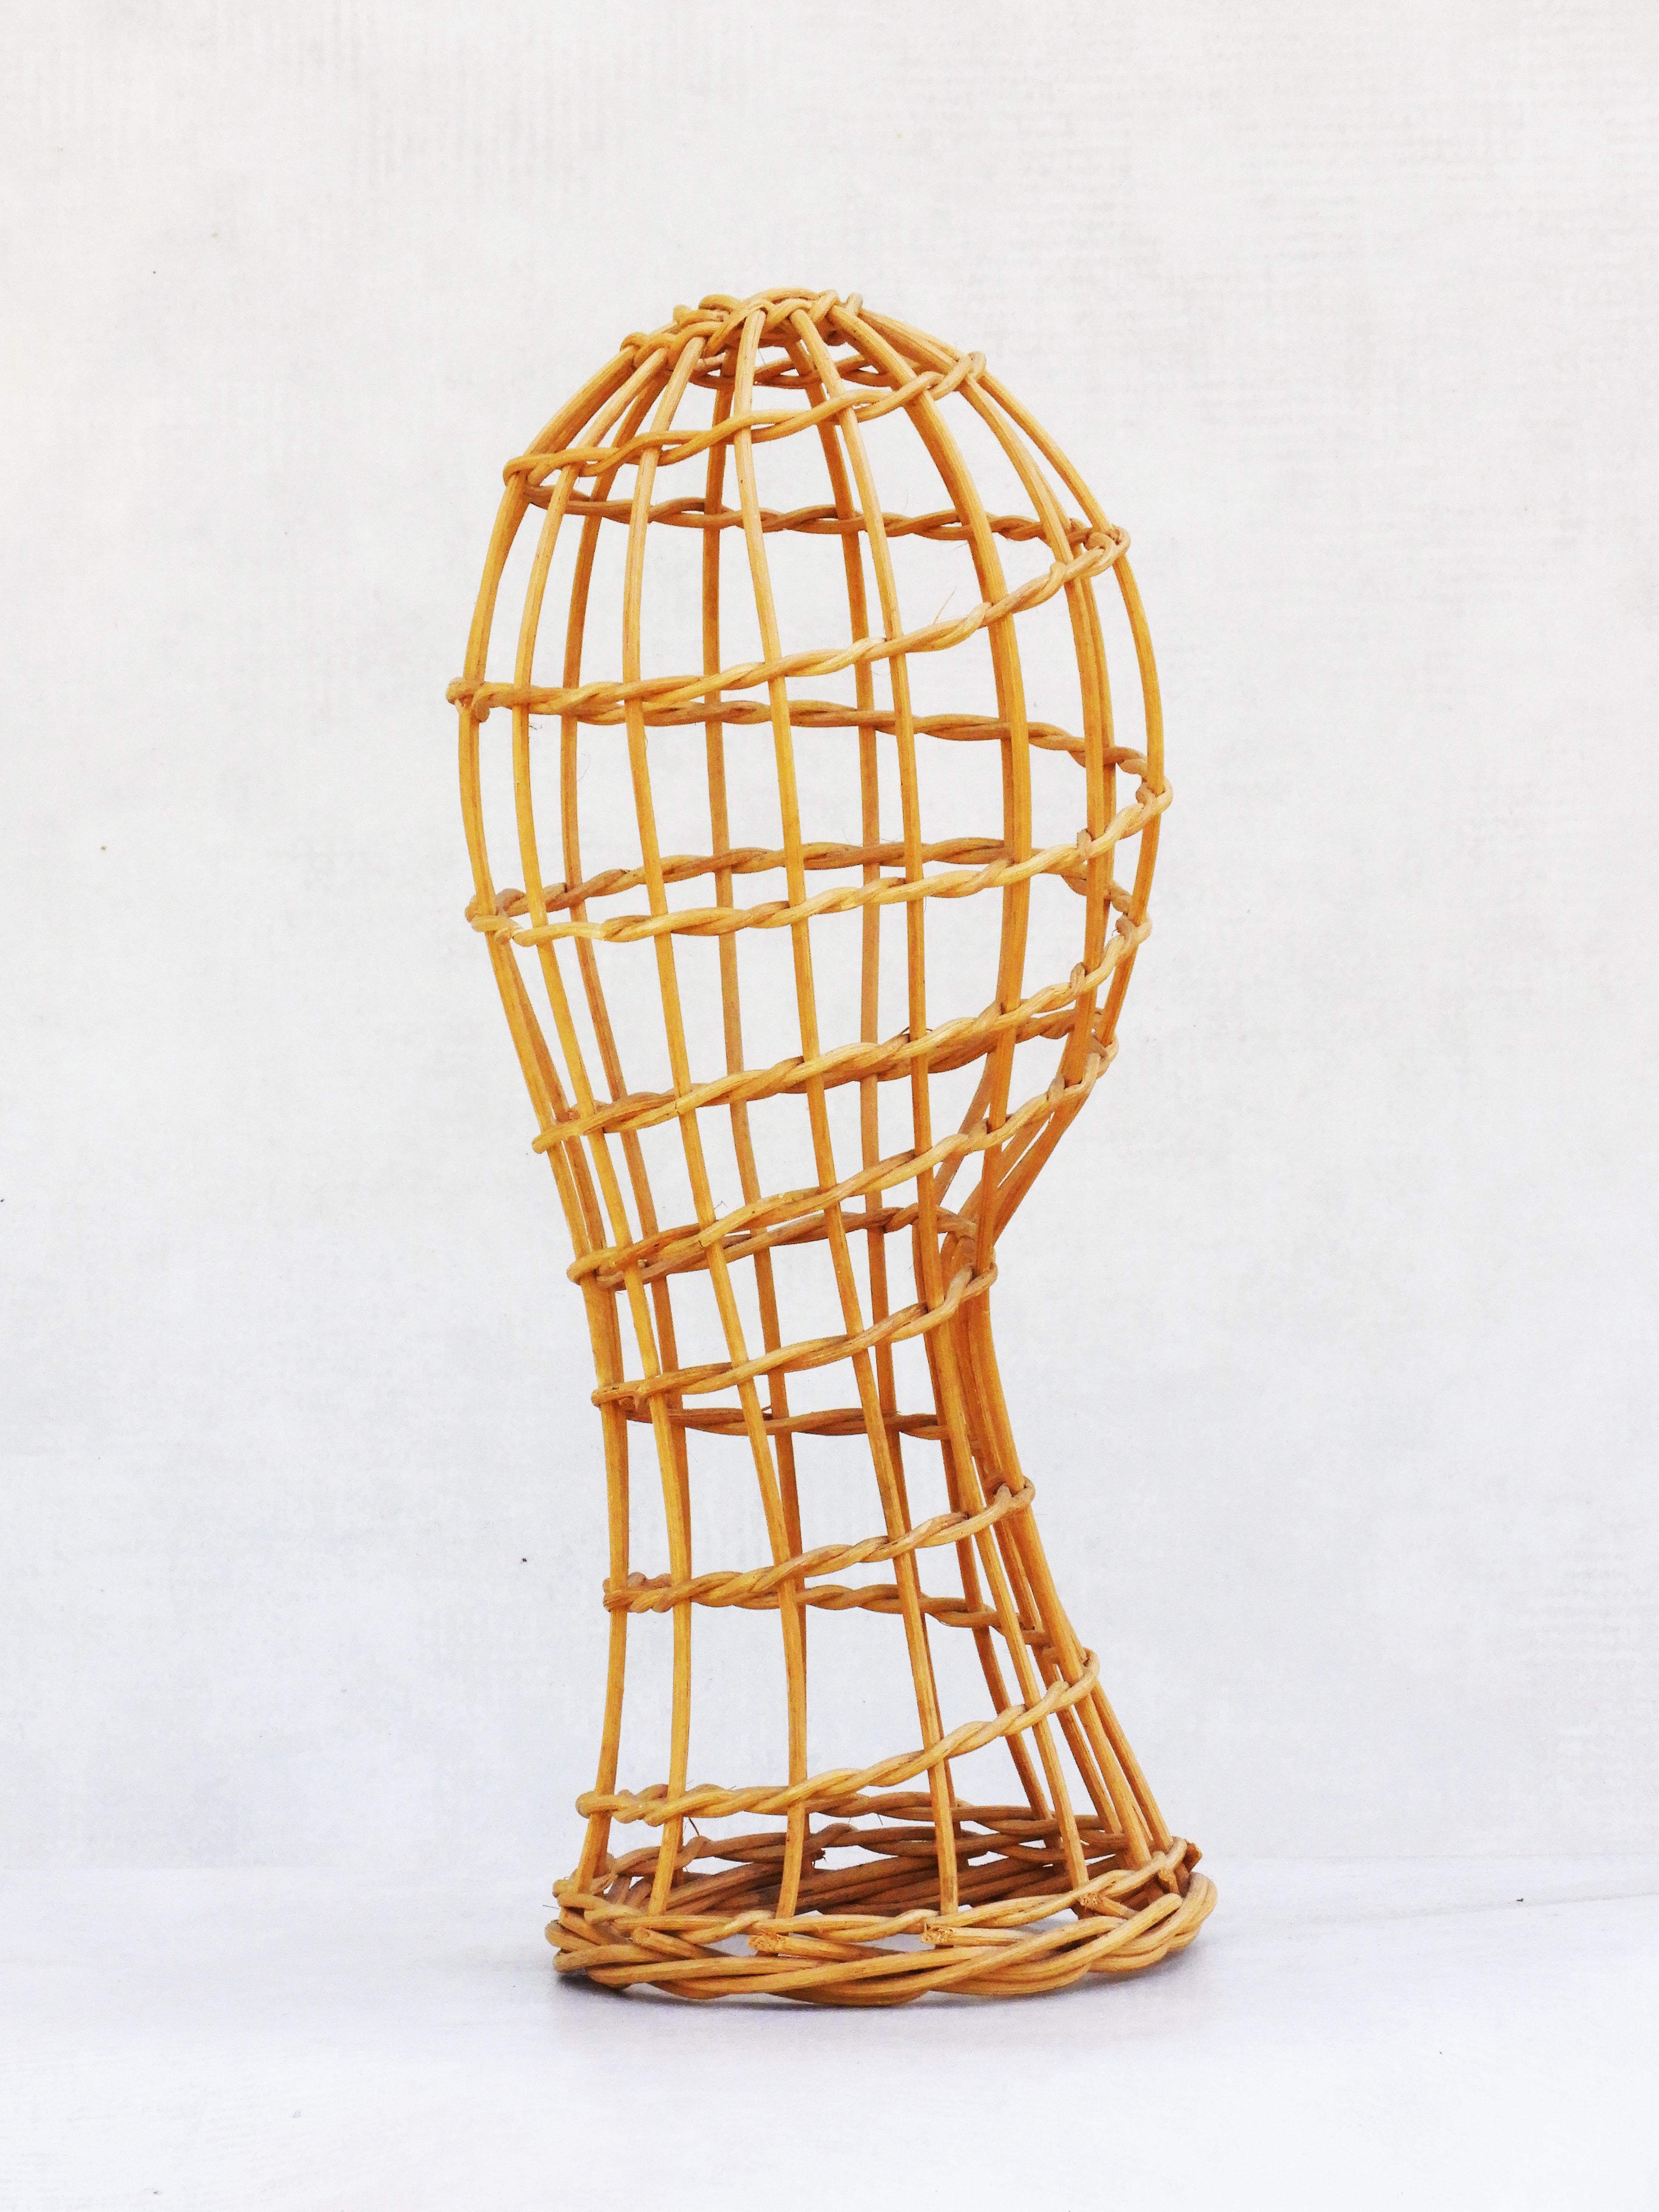 French Mid Century Rattan Hat Stand Head Sculpture.
A superb French milliner's 'Marotte' in rattan. Circa 1950's France
In very good vintage condition.